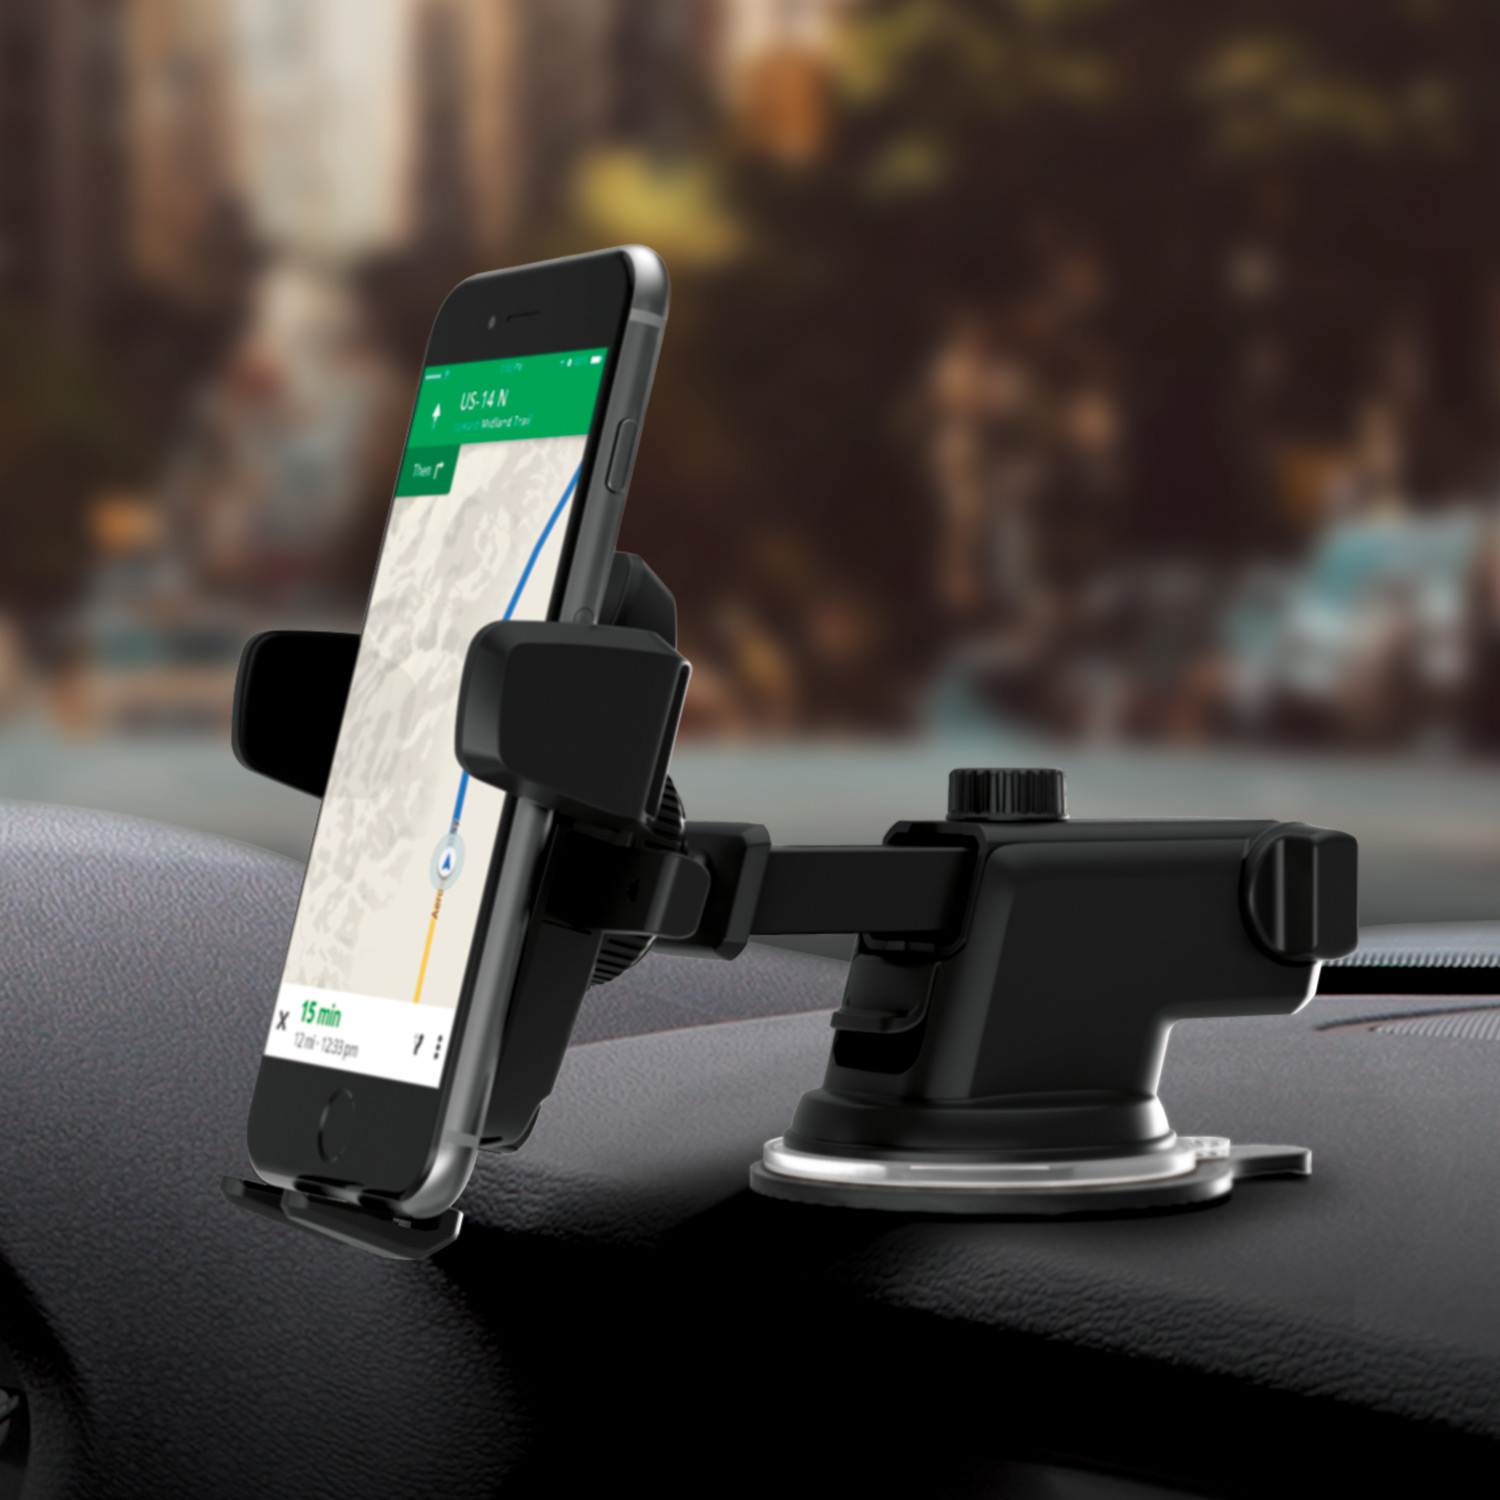 iOttie Easy One Touch 3 Car Mount Holder for iPhone 6s Plus 6s 5s 5c Samsung  Galaxy S7 Edge S6 S5 Note 5 4, Car Accessories on Carousell